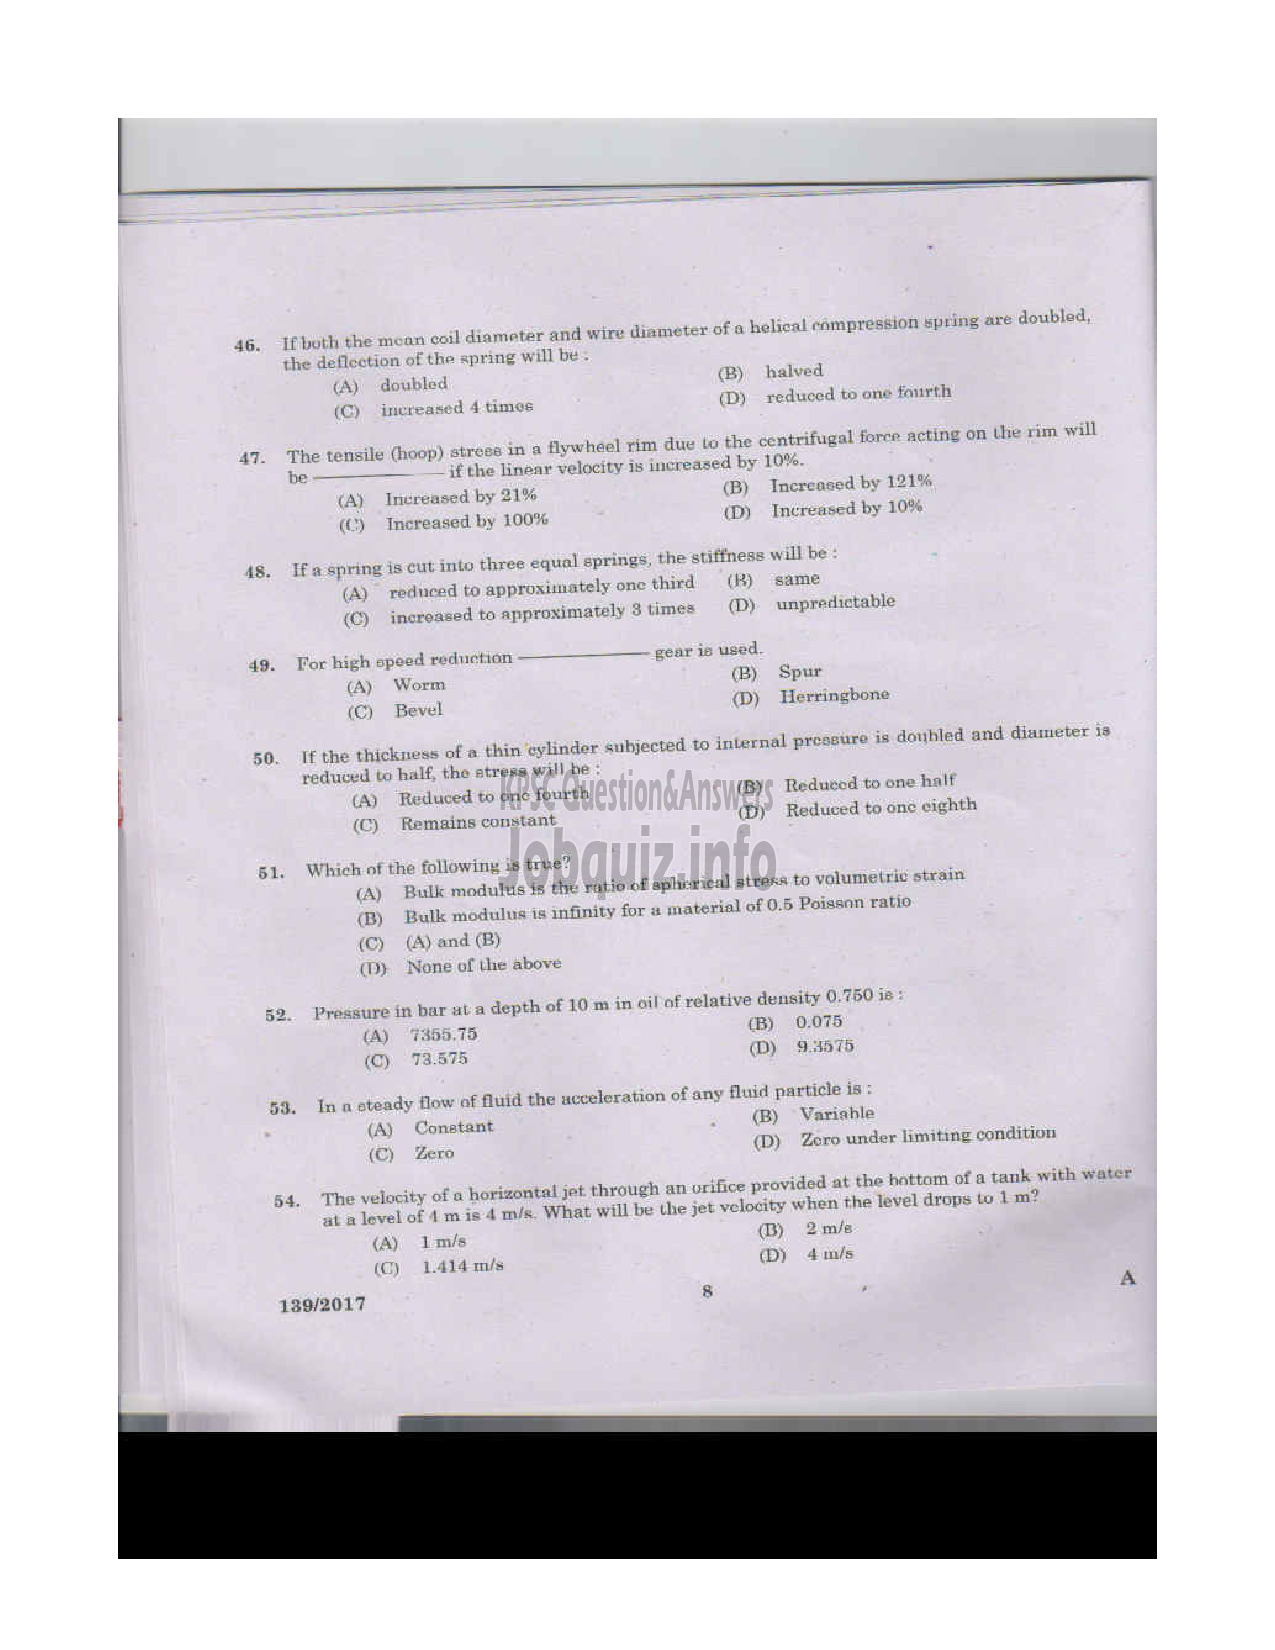 Kerala PSC Question Paper - ASSISTANT ENGINEER GROUND WATER DEPARTMENT-7